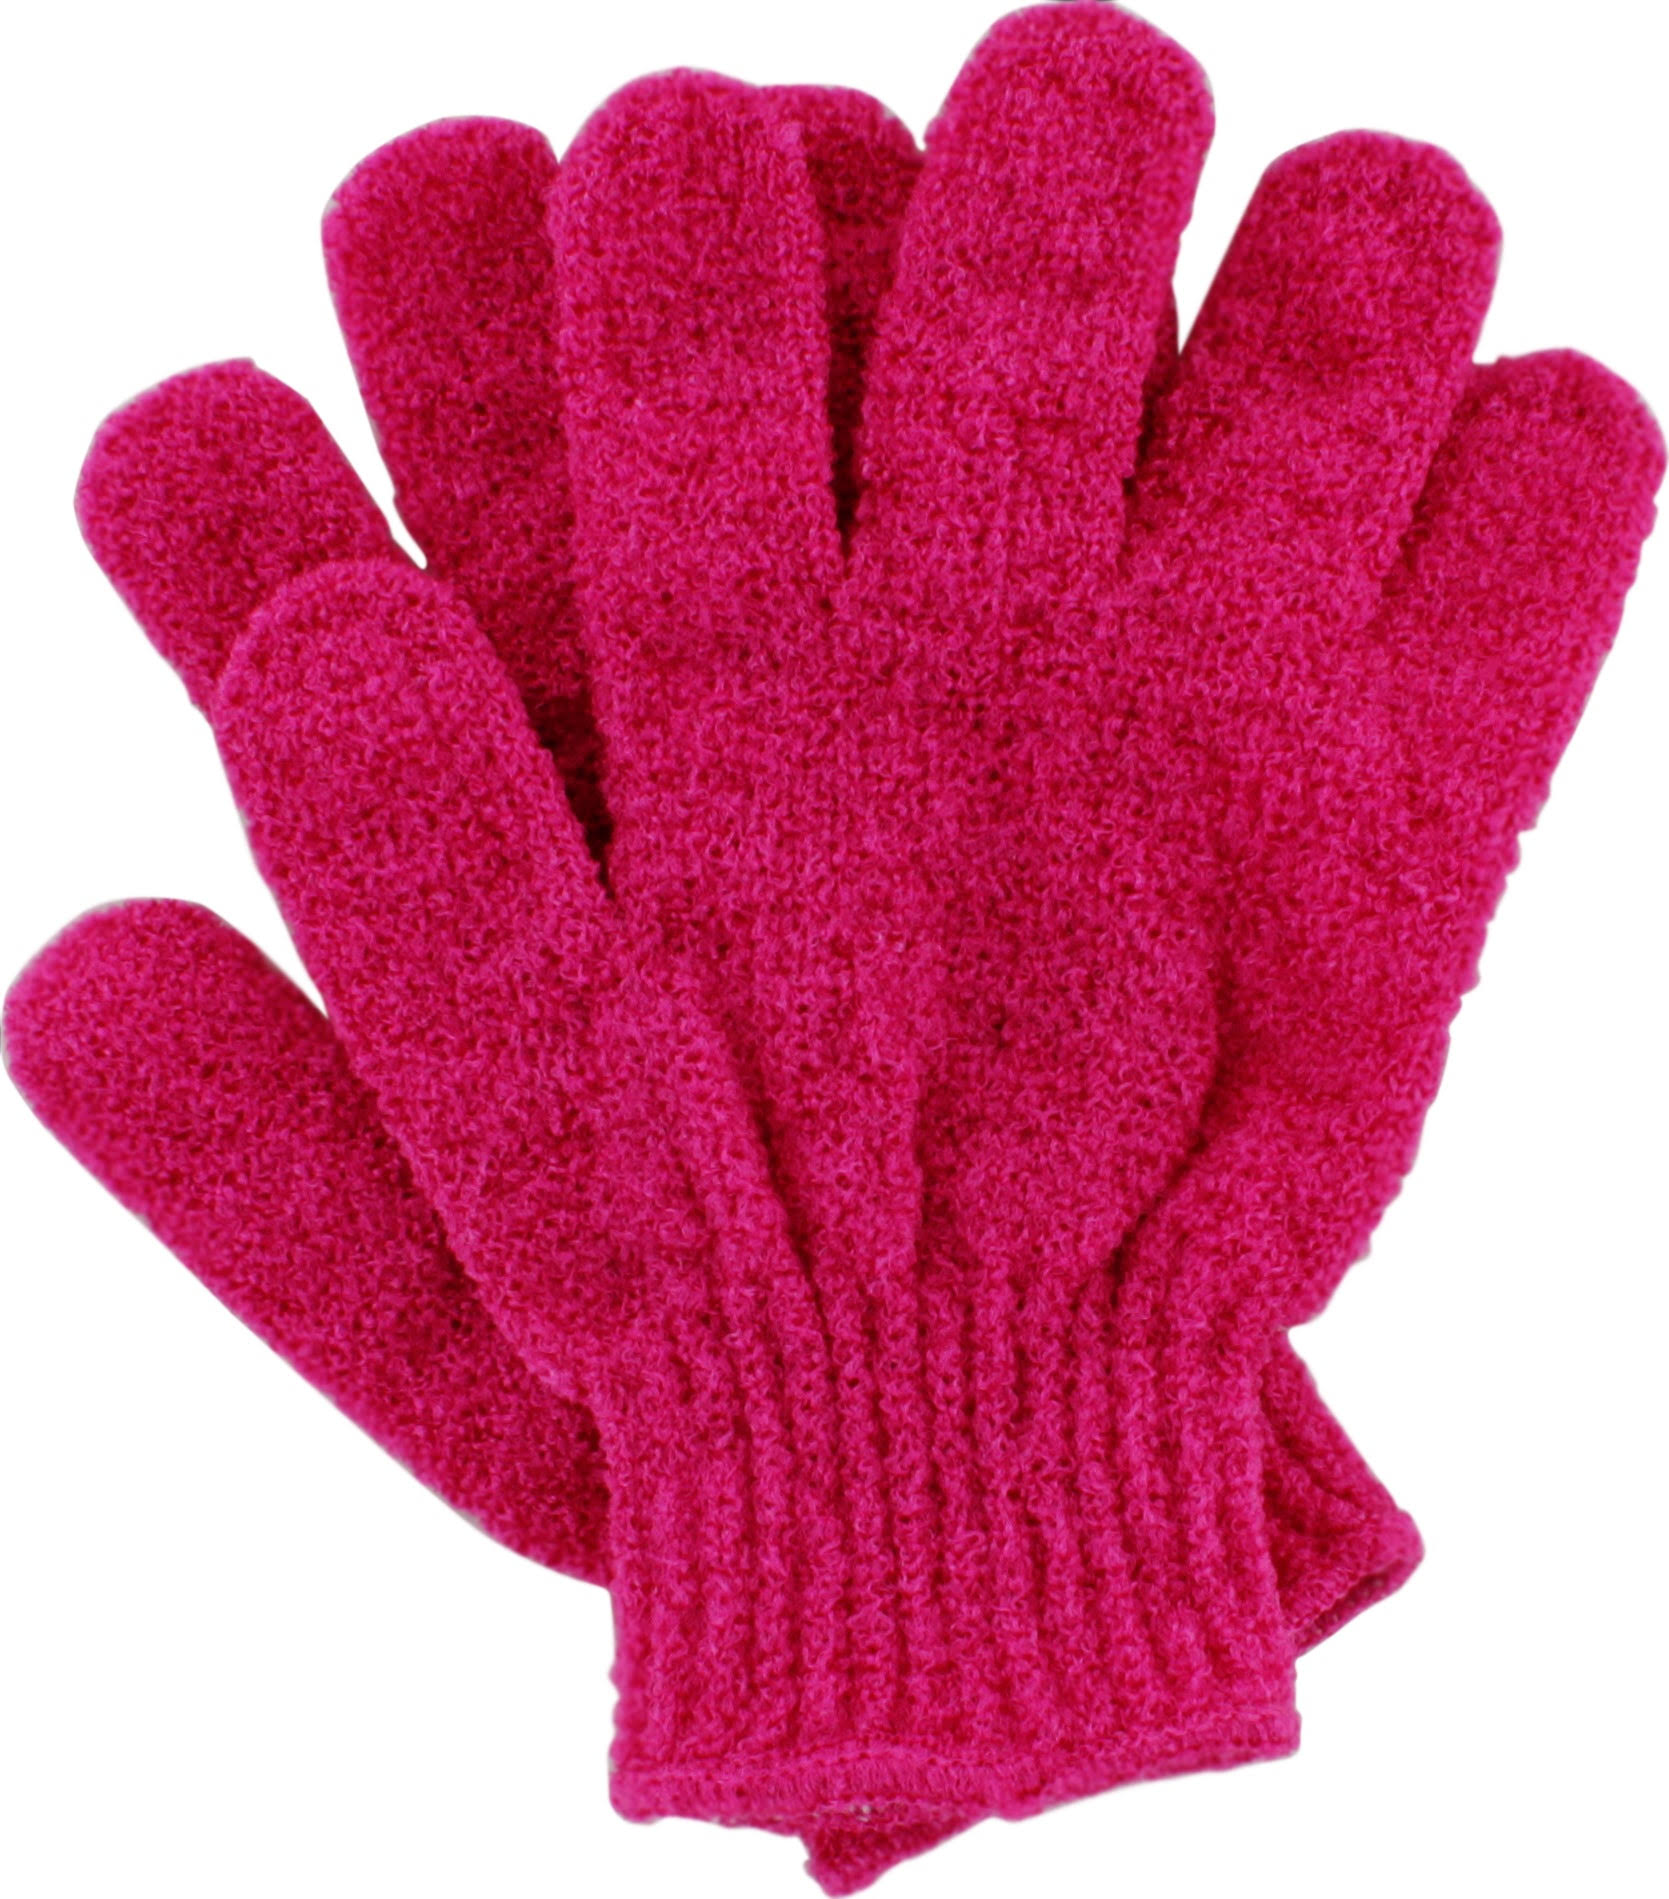 Cocoa Brown - Exfoliating Gloves